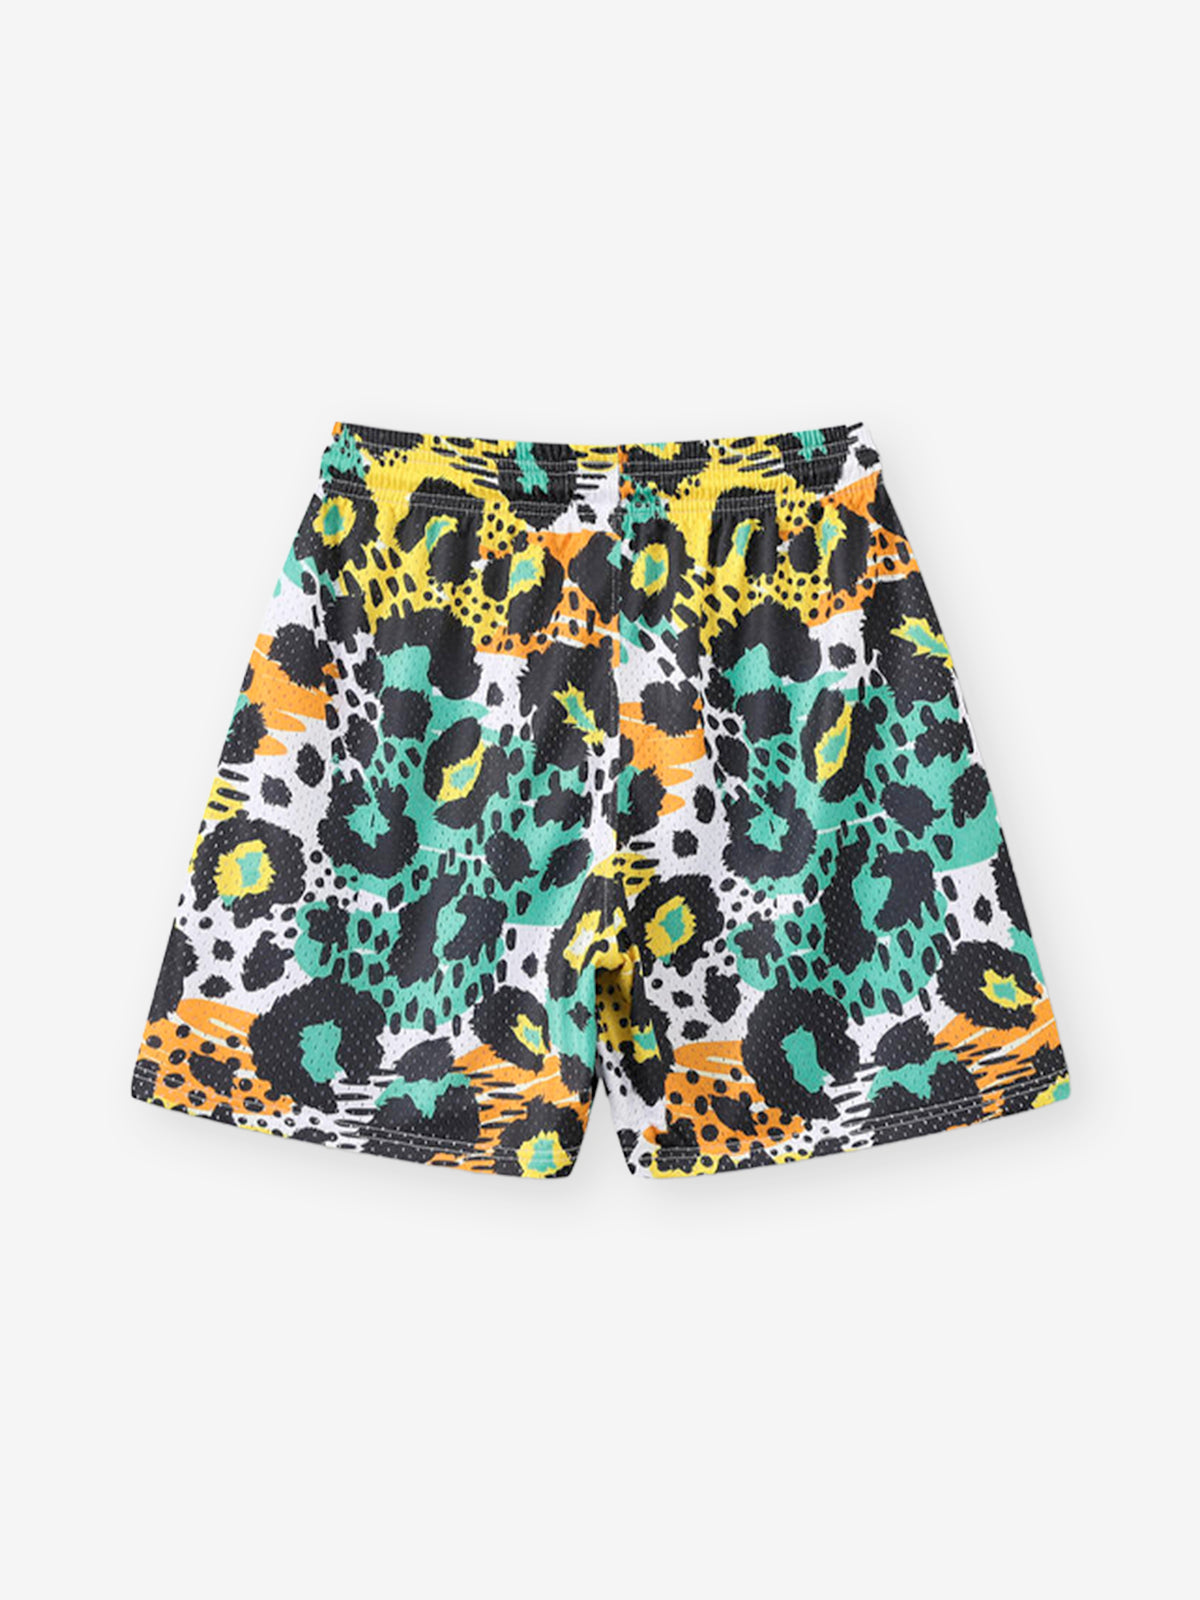 BOUNCE BACK© leopard-print double-layer quick-drying shorts